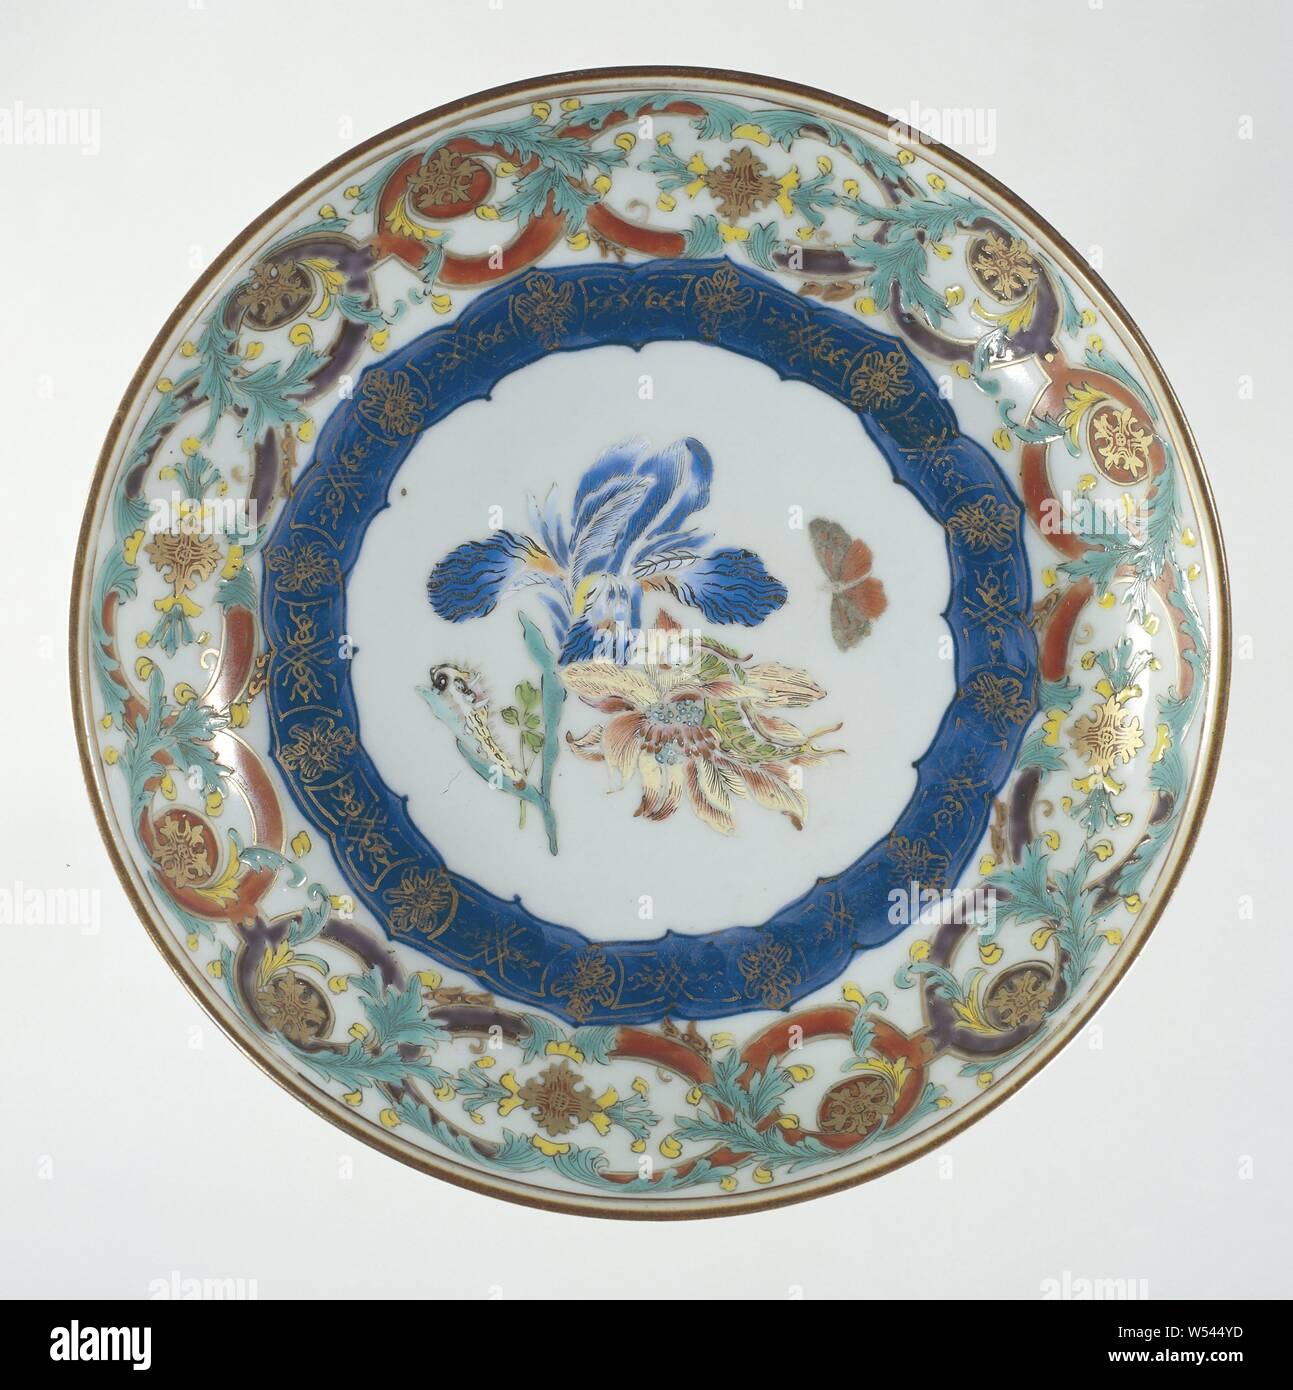 Saucer-dish with flowers, butterfly and ornamental borders, Porcelain dish with round wall, painted in underglaze blue and on the glaze in blue, red, pink, green, yellow, black and gold. On the flat two flower branches (iris, anemone) on which two caterpillars, next to it a flying butterfly, around it a decorative band in underglaze blue with gold, the wall a band with a switched pattern with leaf vines, the outer edge with a band of napkin work. European representation in enamel colors., anonymous, China, c. 1740 - c. 1750, Qing-dynasty (1644-1912) / Qianlong-period (1736-1795), porcelain Stock Photo